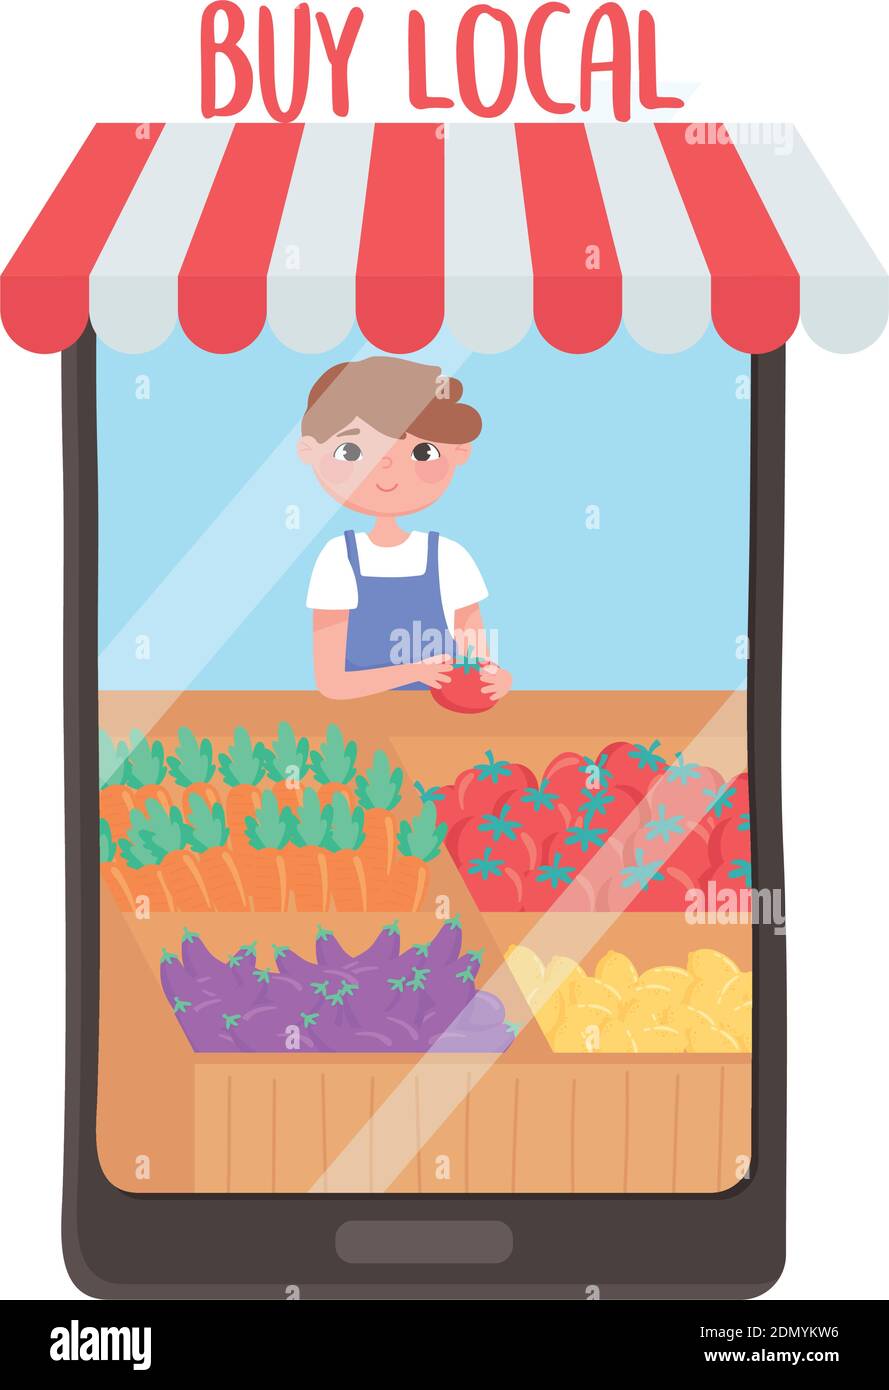 small business, shop local design white background vector illustration Stock Vector